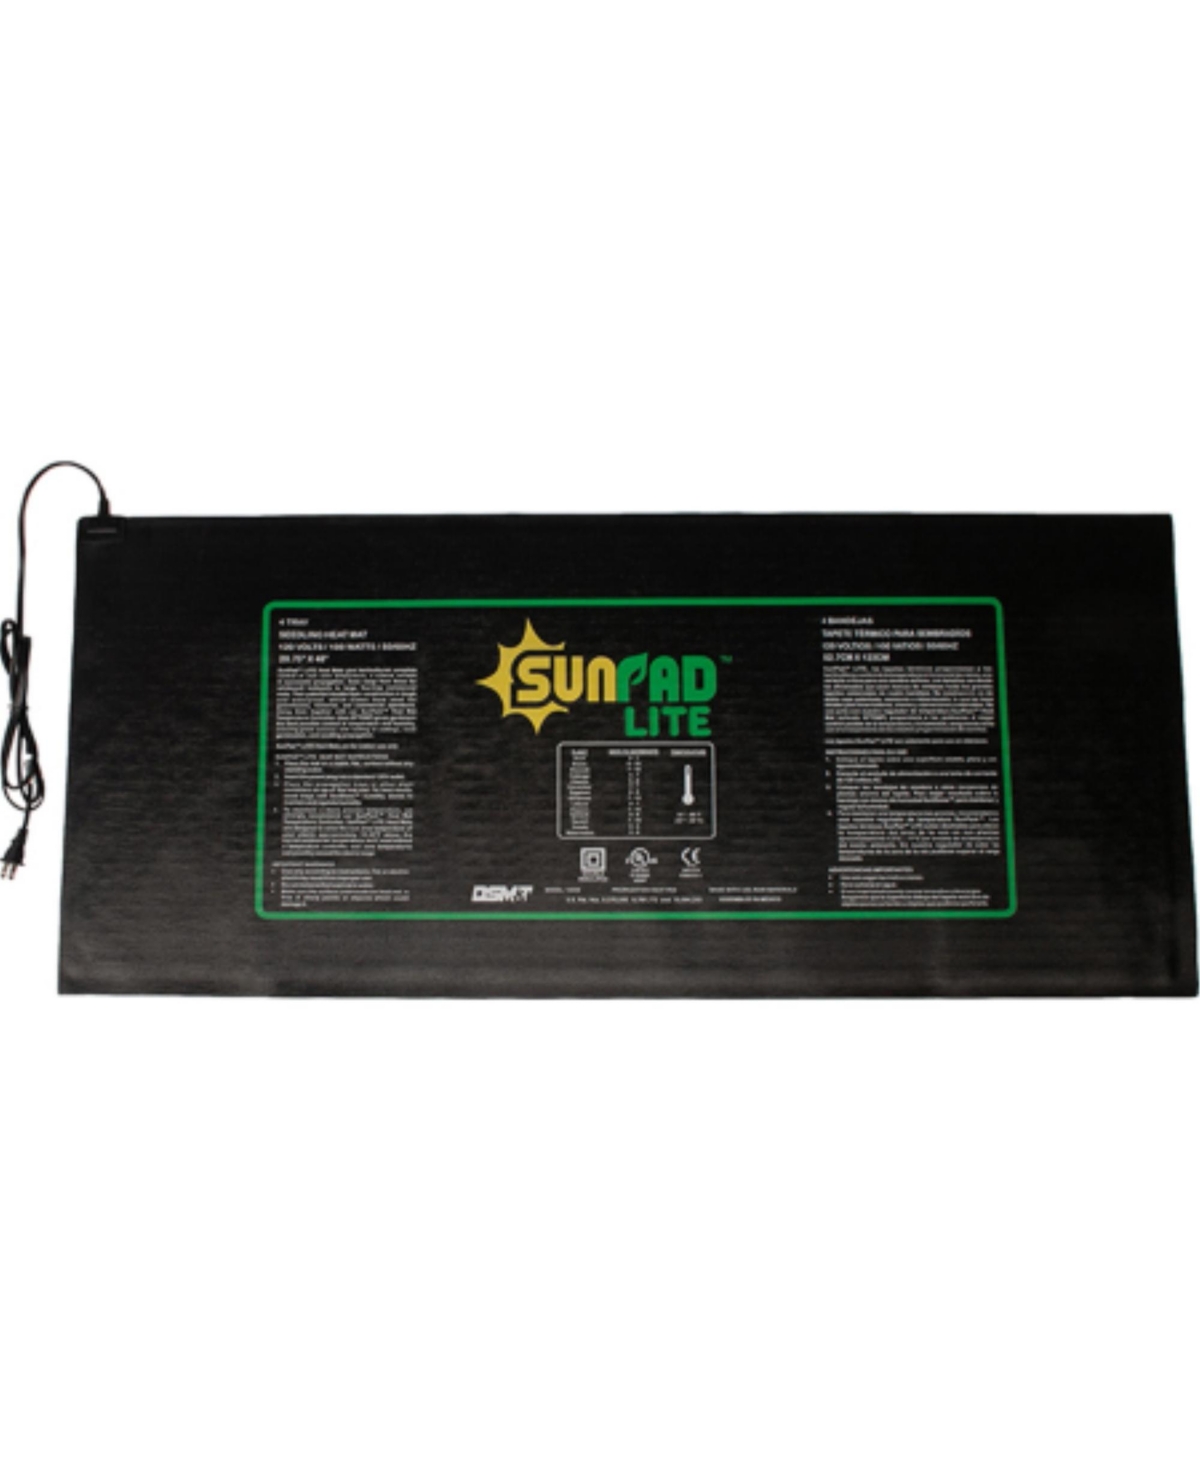 Pro 150W Commercial Propagation Master Heat Mat for Seeds - 21 Inches x 60 Inches - Multi